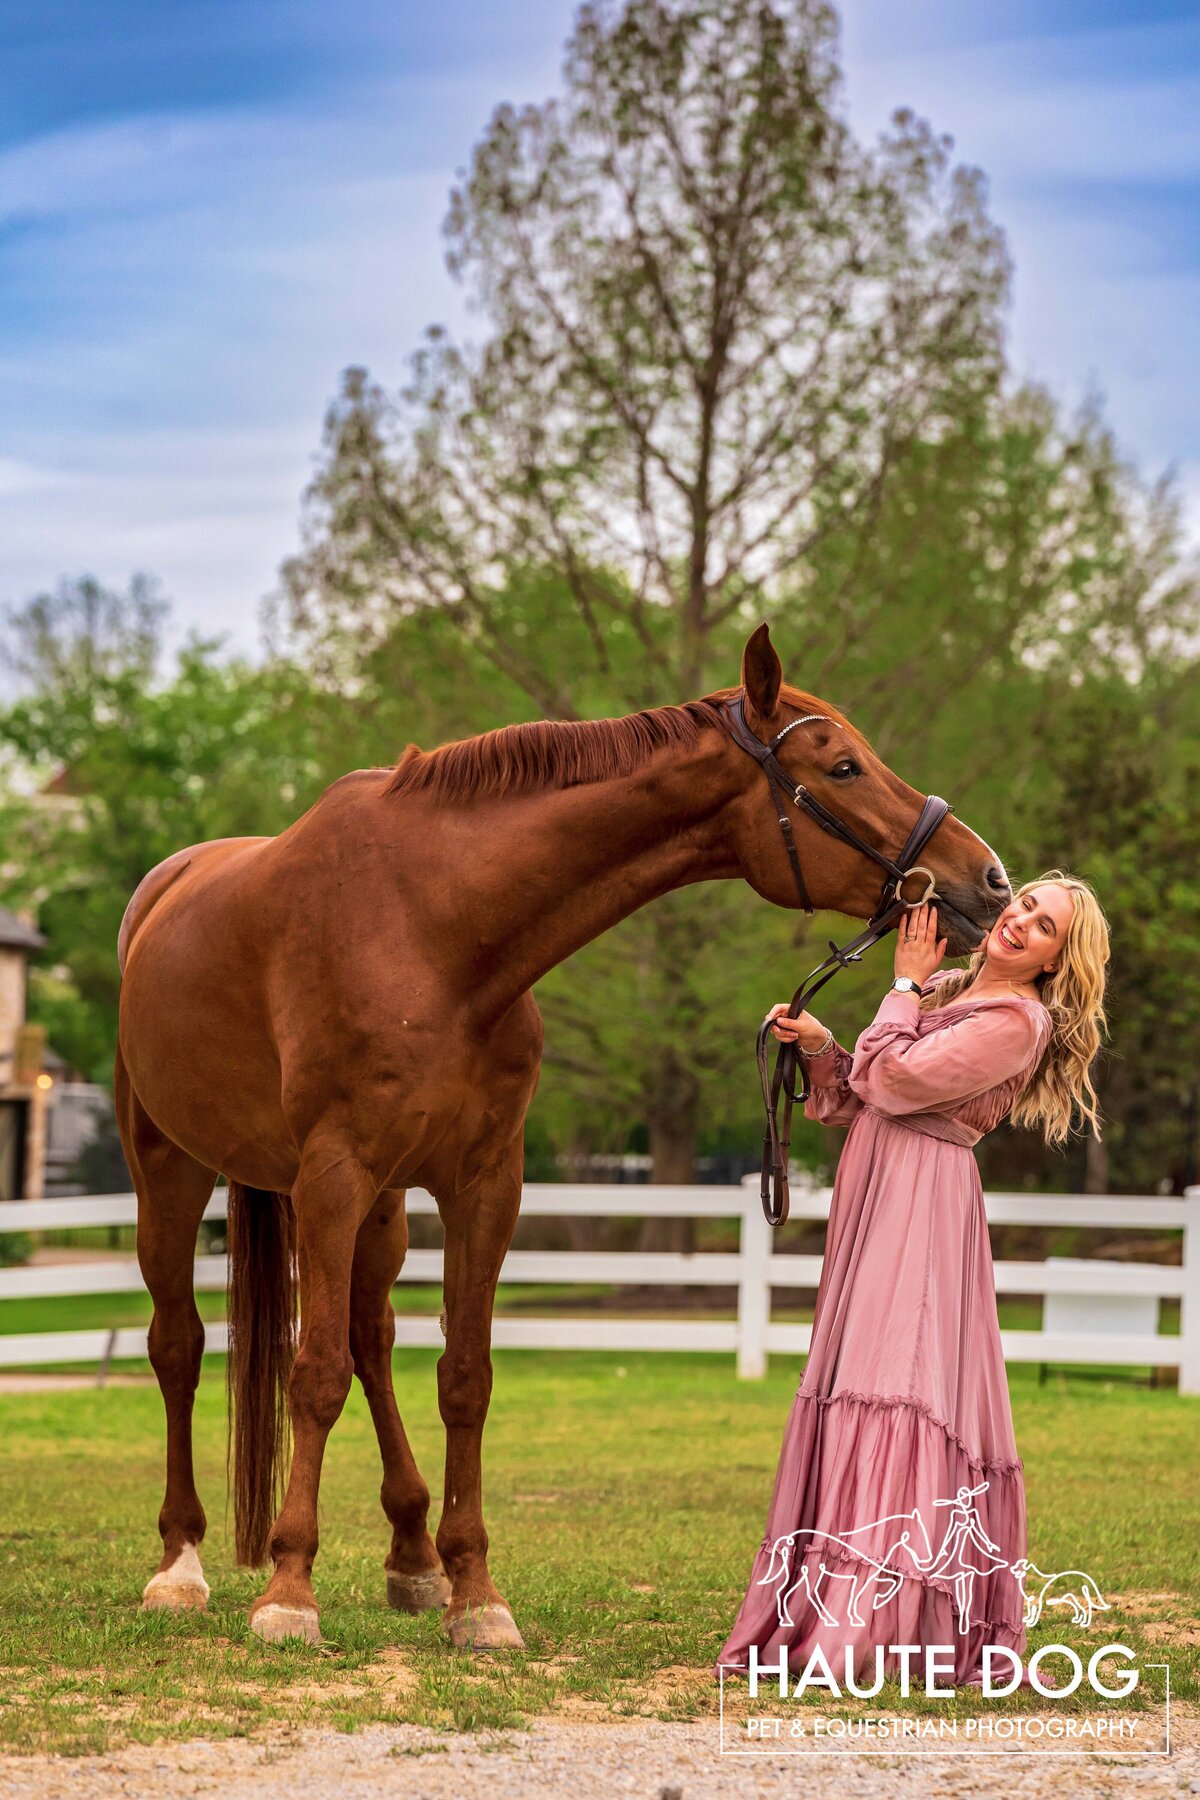 A tall chestnut horse kisses equestrian wearing a long pink dress on the cheek while she laughs.